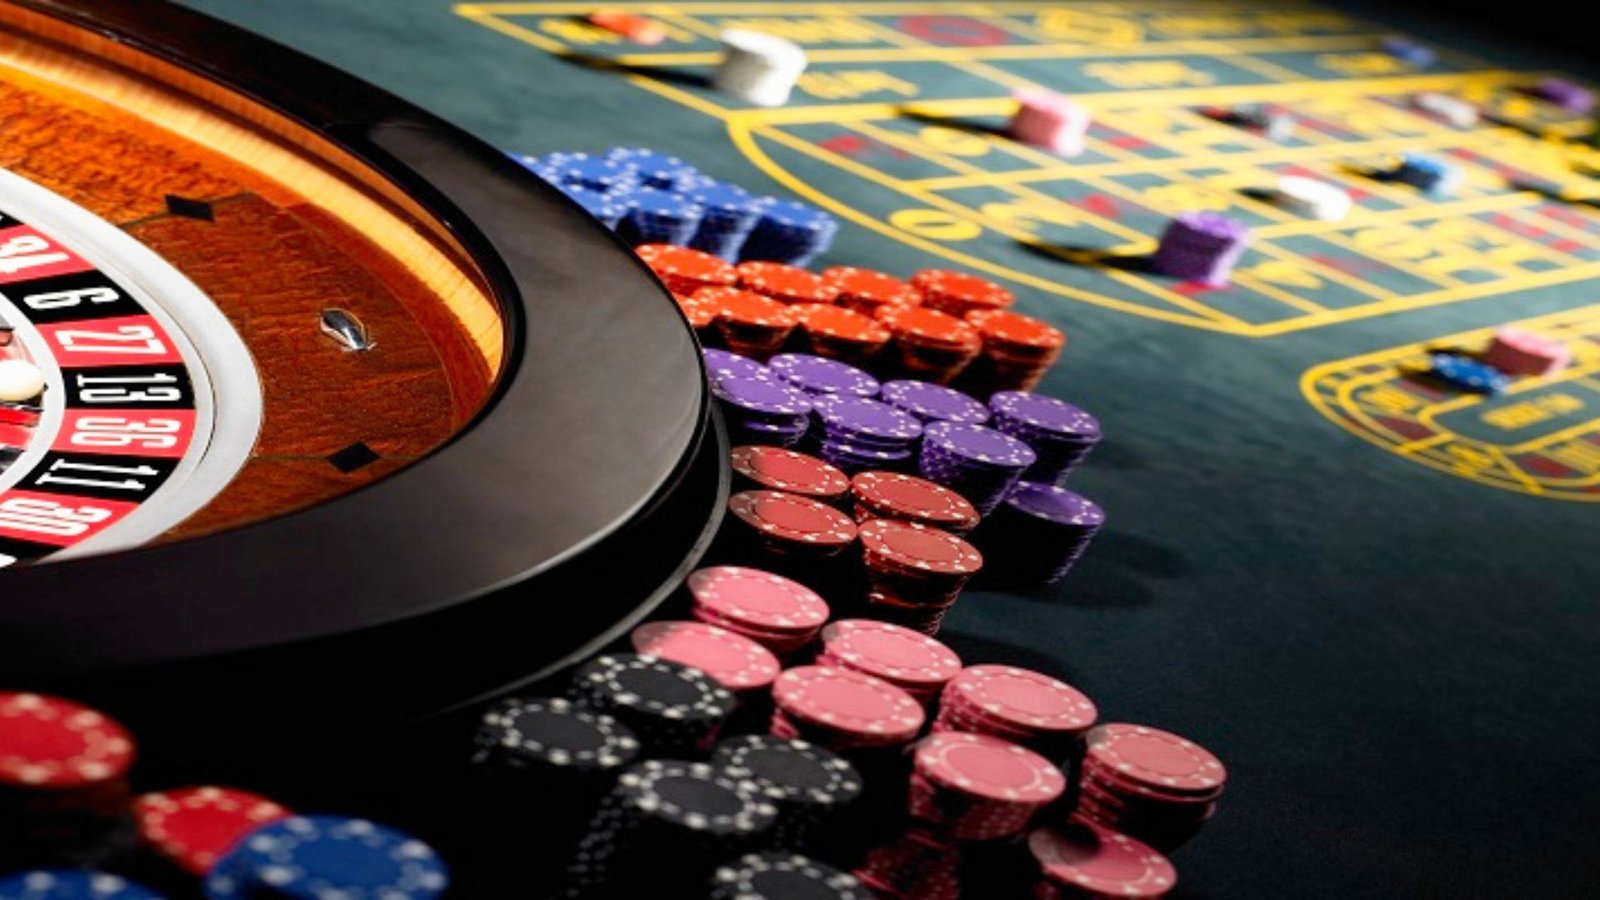 One of the Most Popular Casino Games